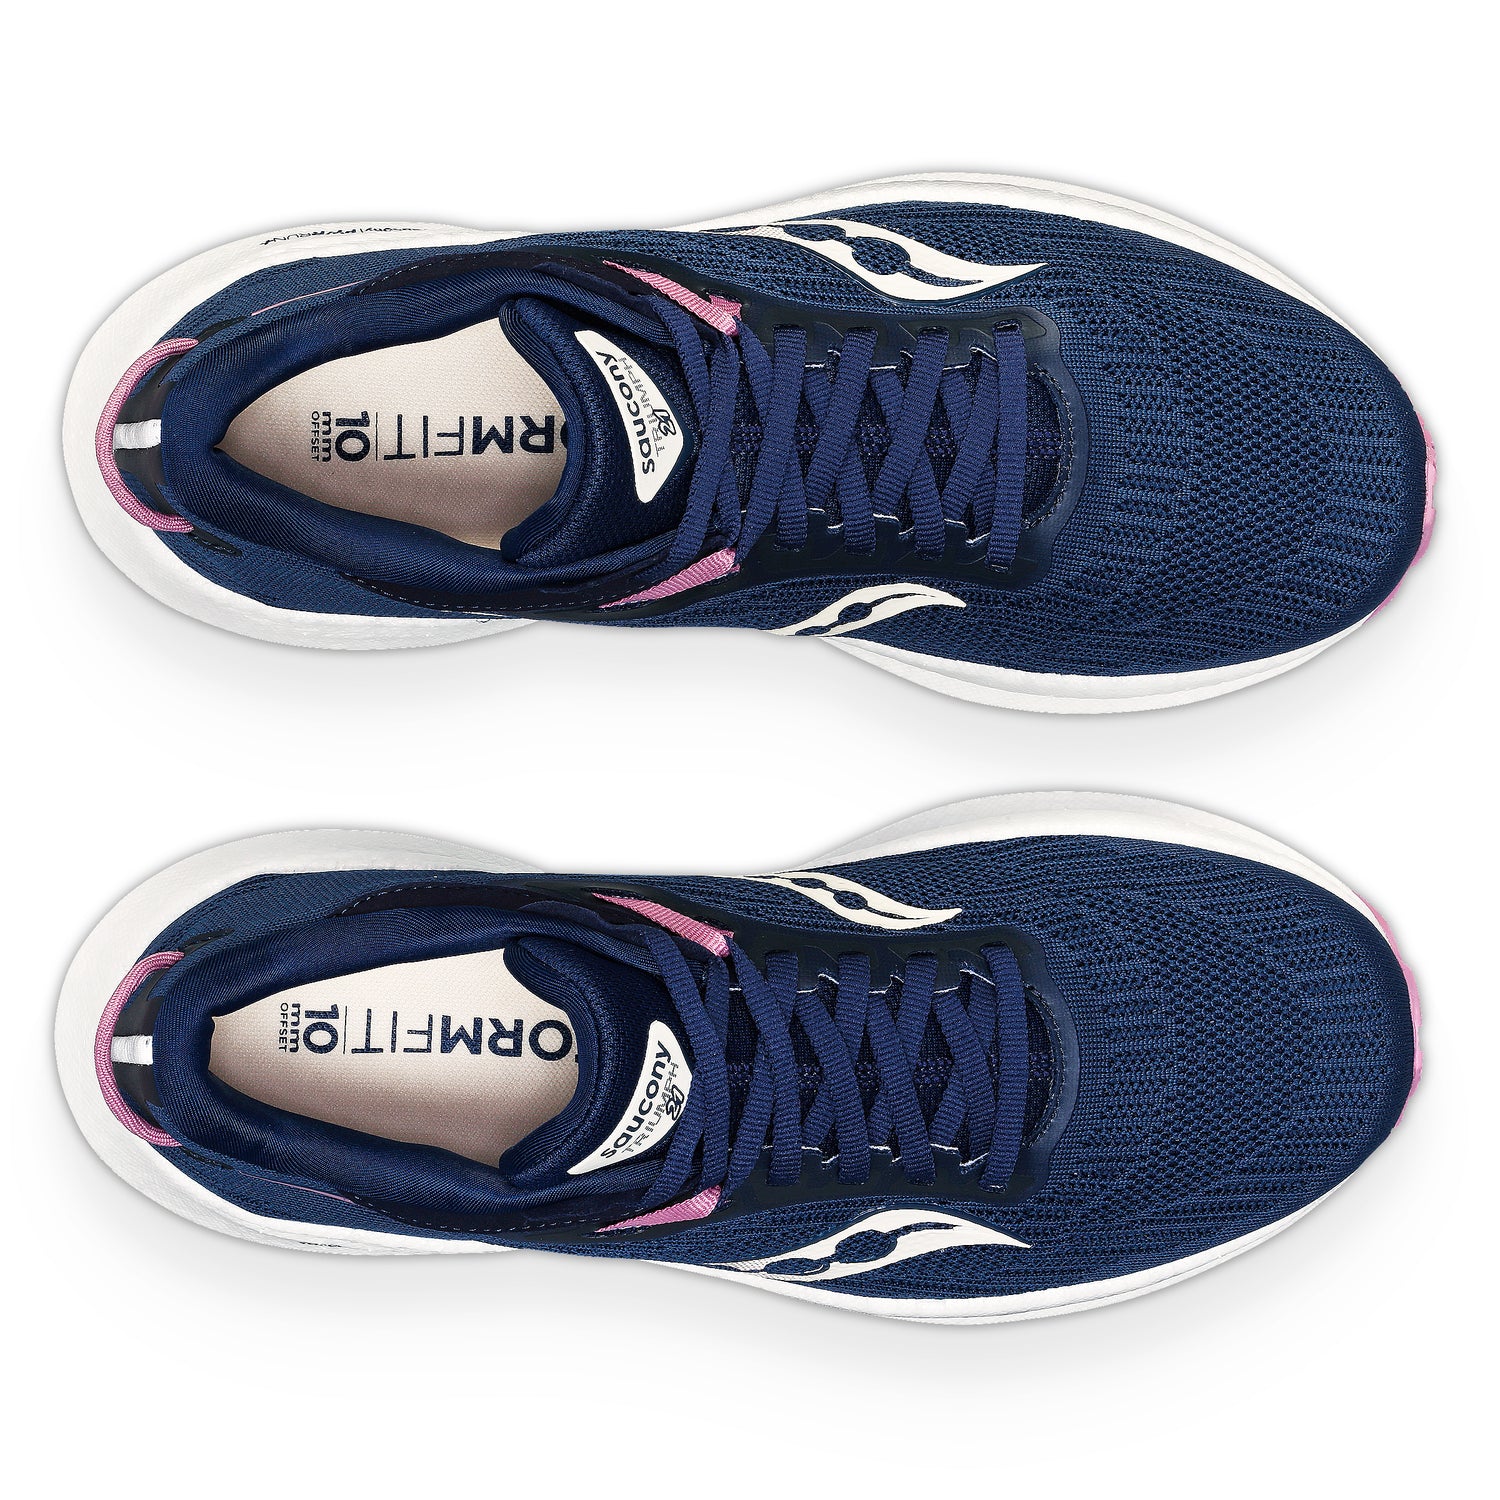 Saucony Women's Triumph 21 Running Shoes Navy/Orchid